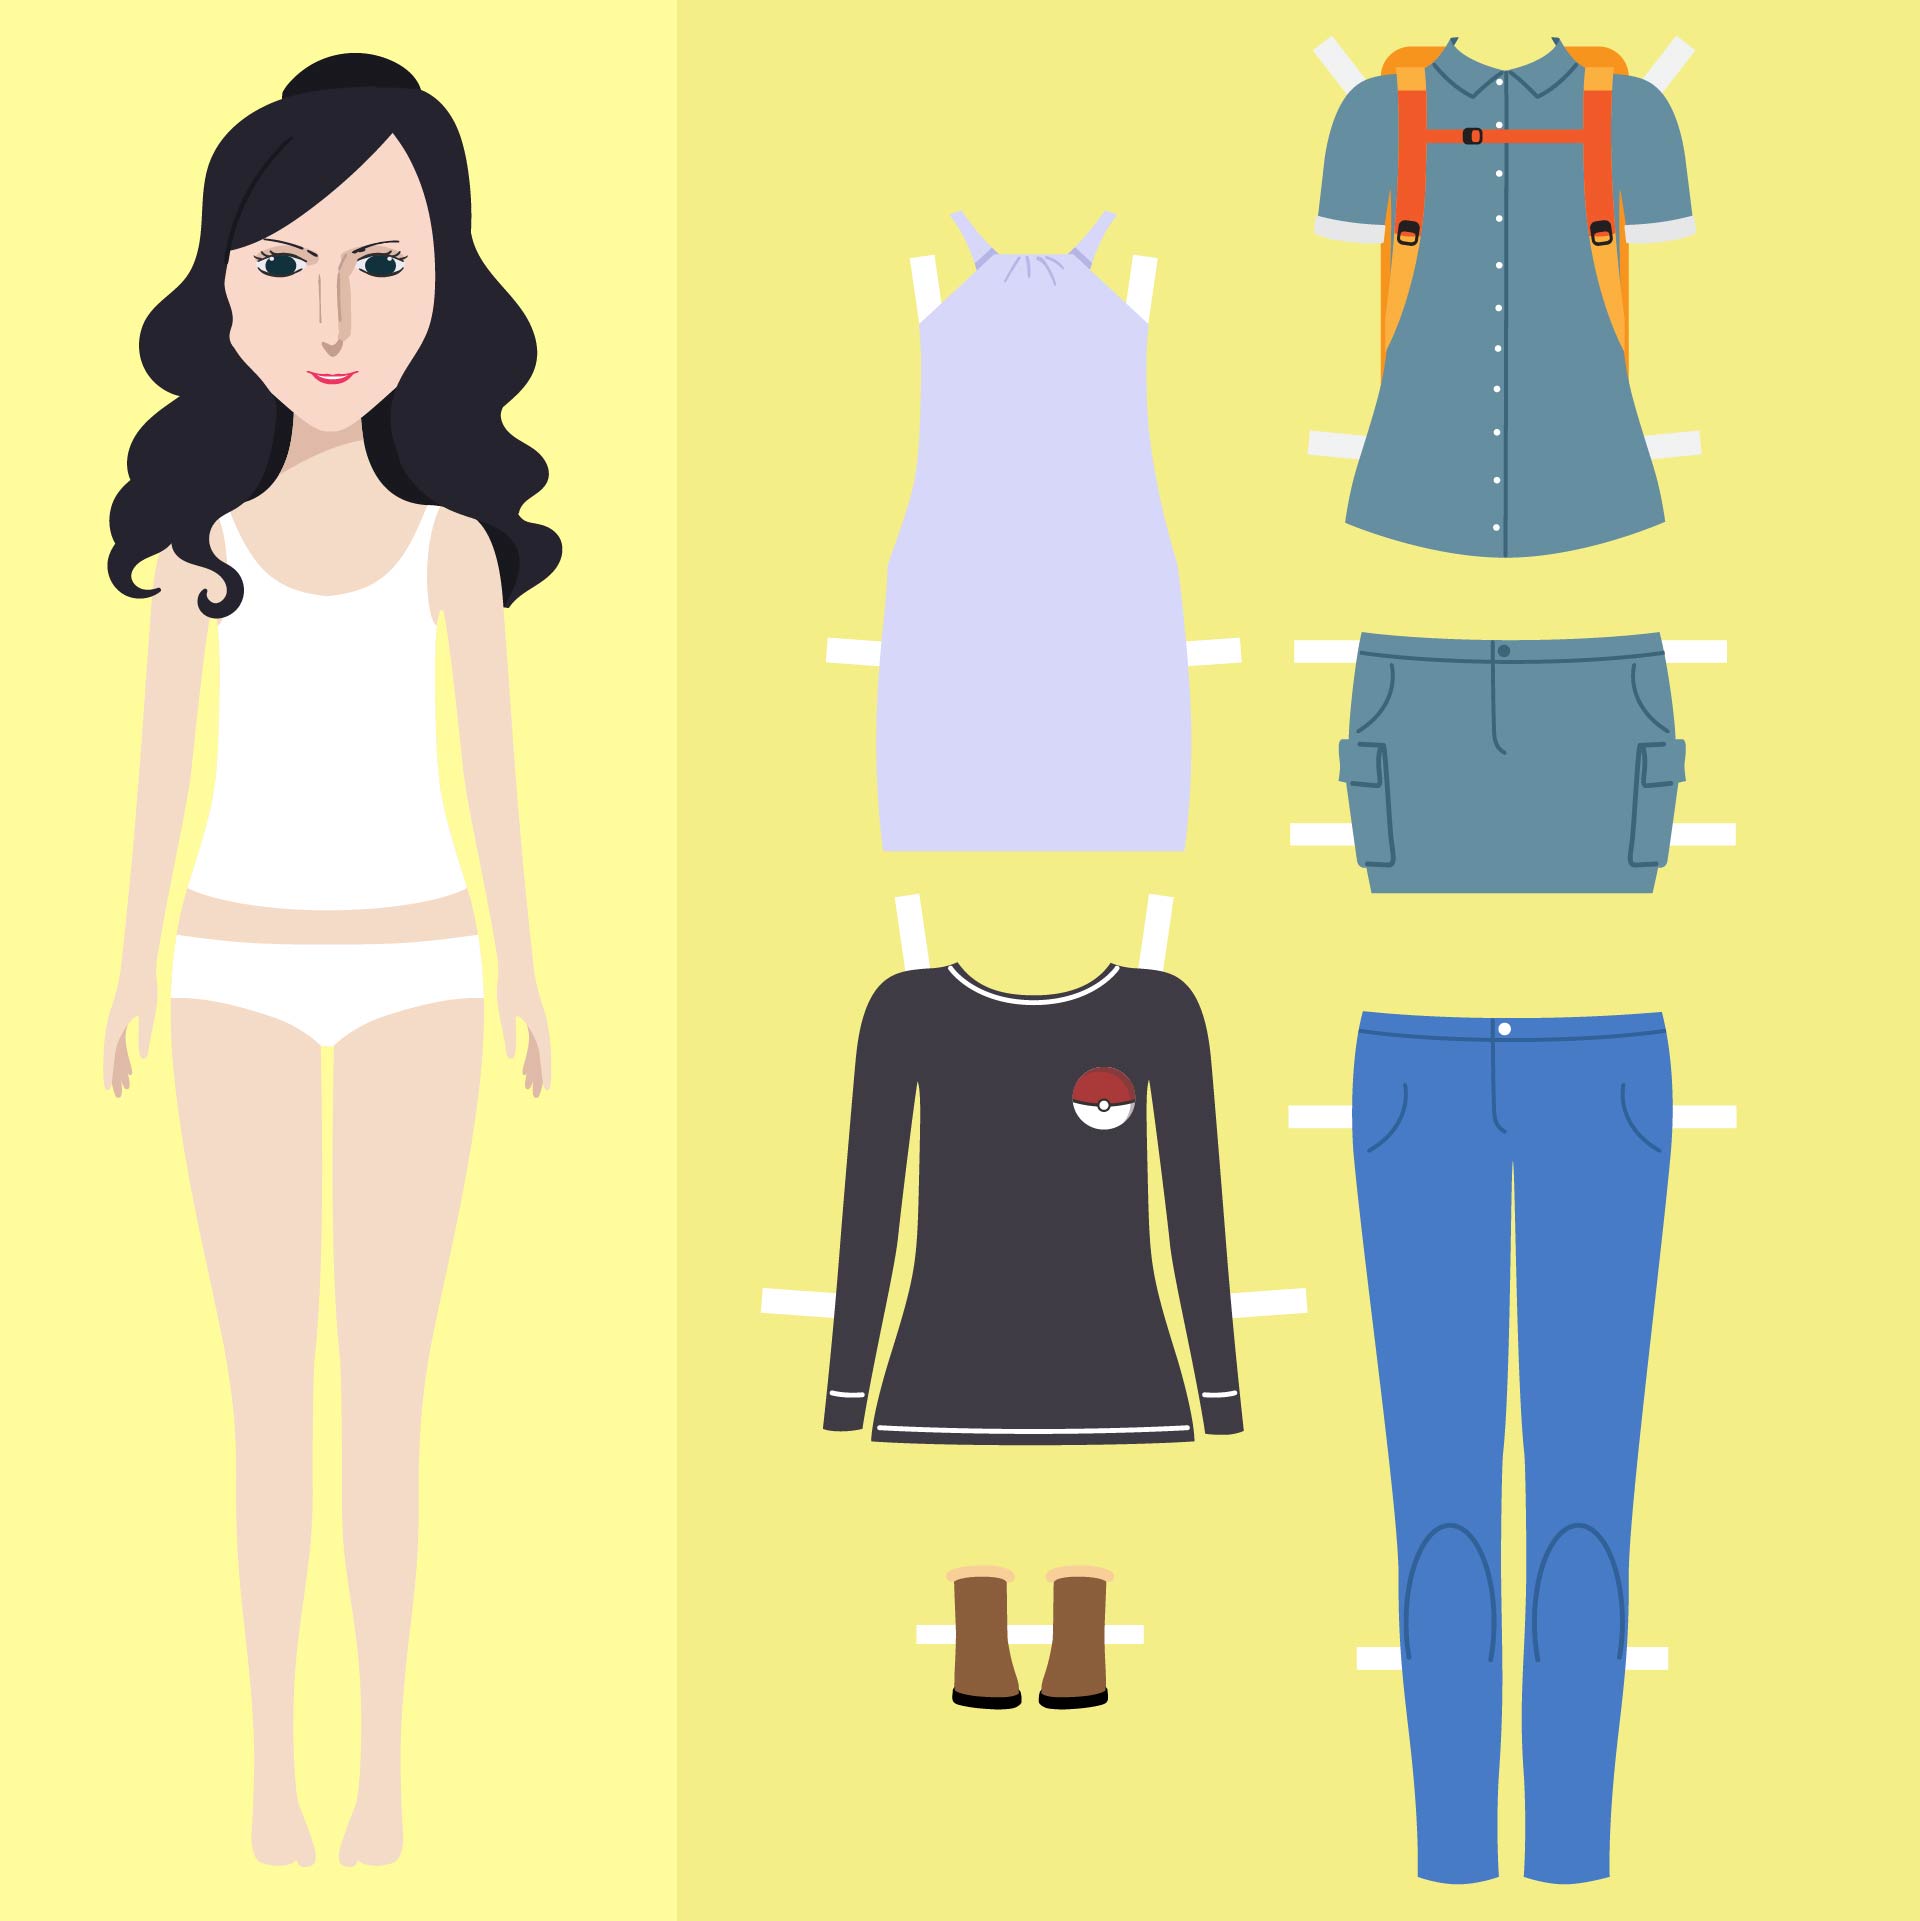 10 Best Images of Printable Cutouts People Printable Paper People Cutouts, Free Printable